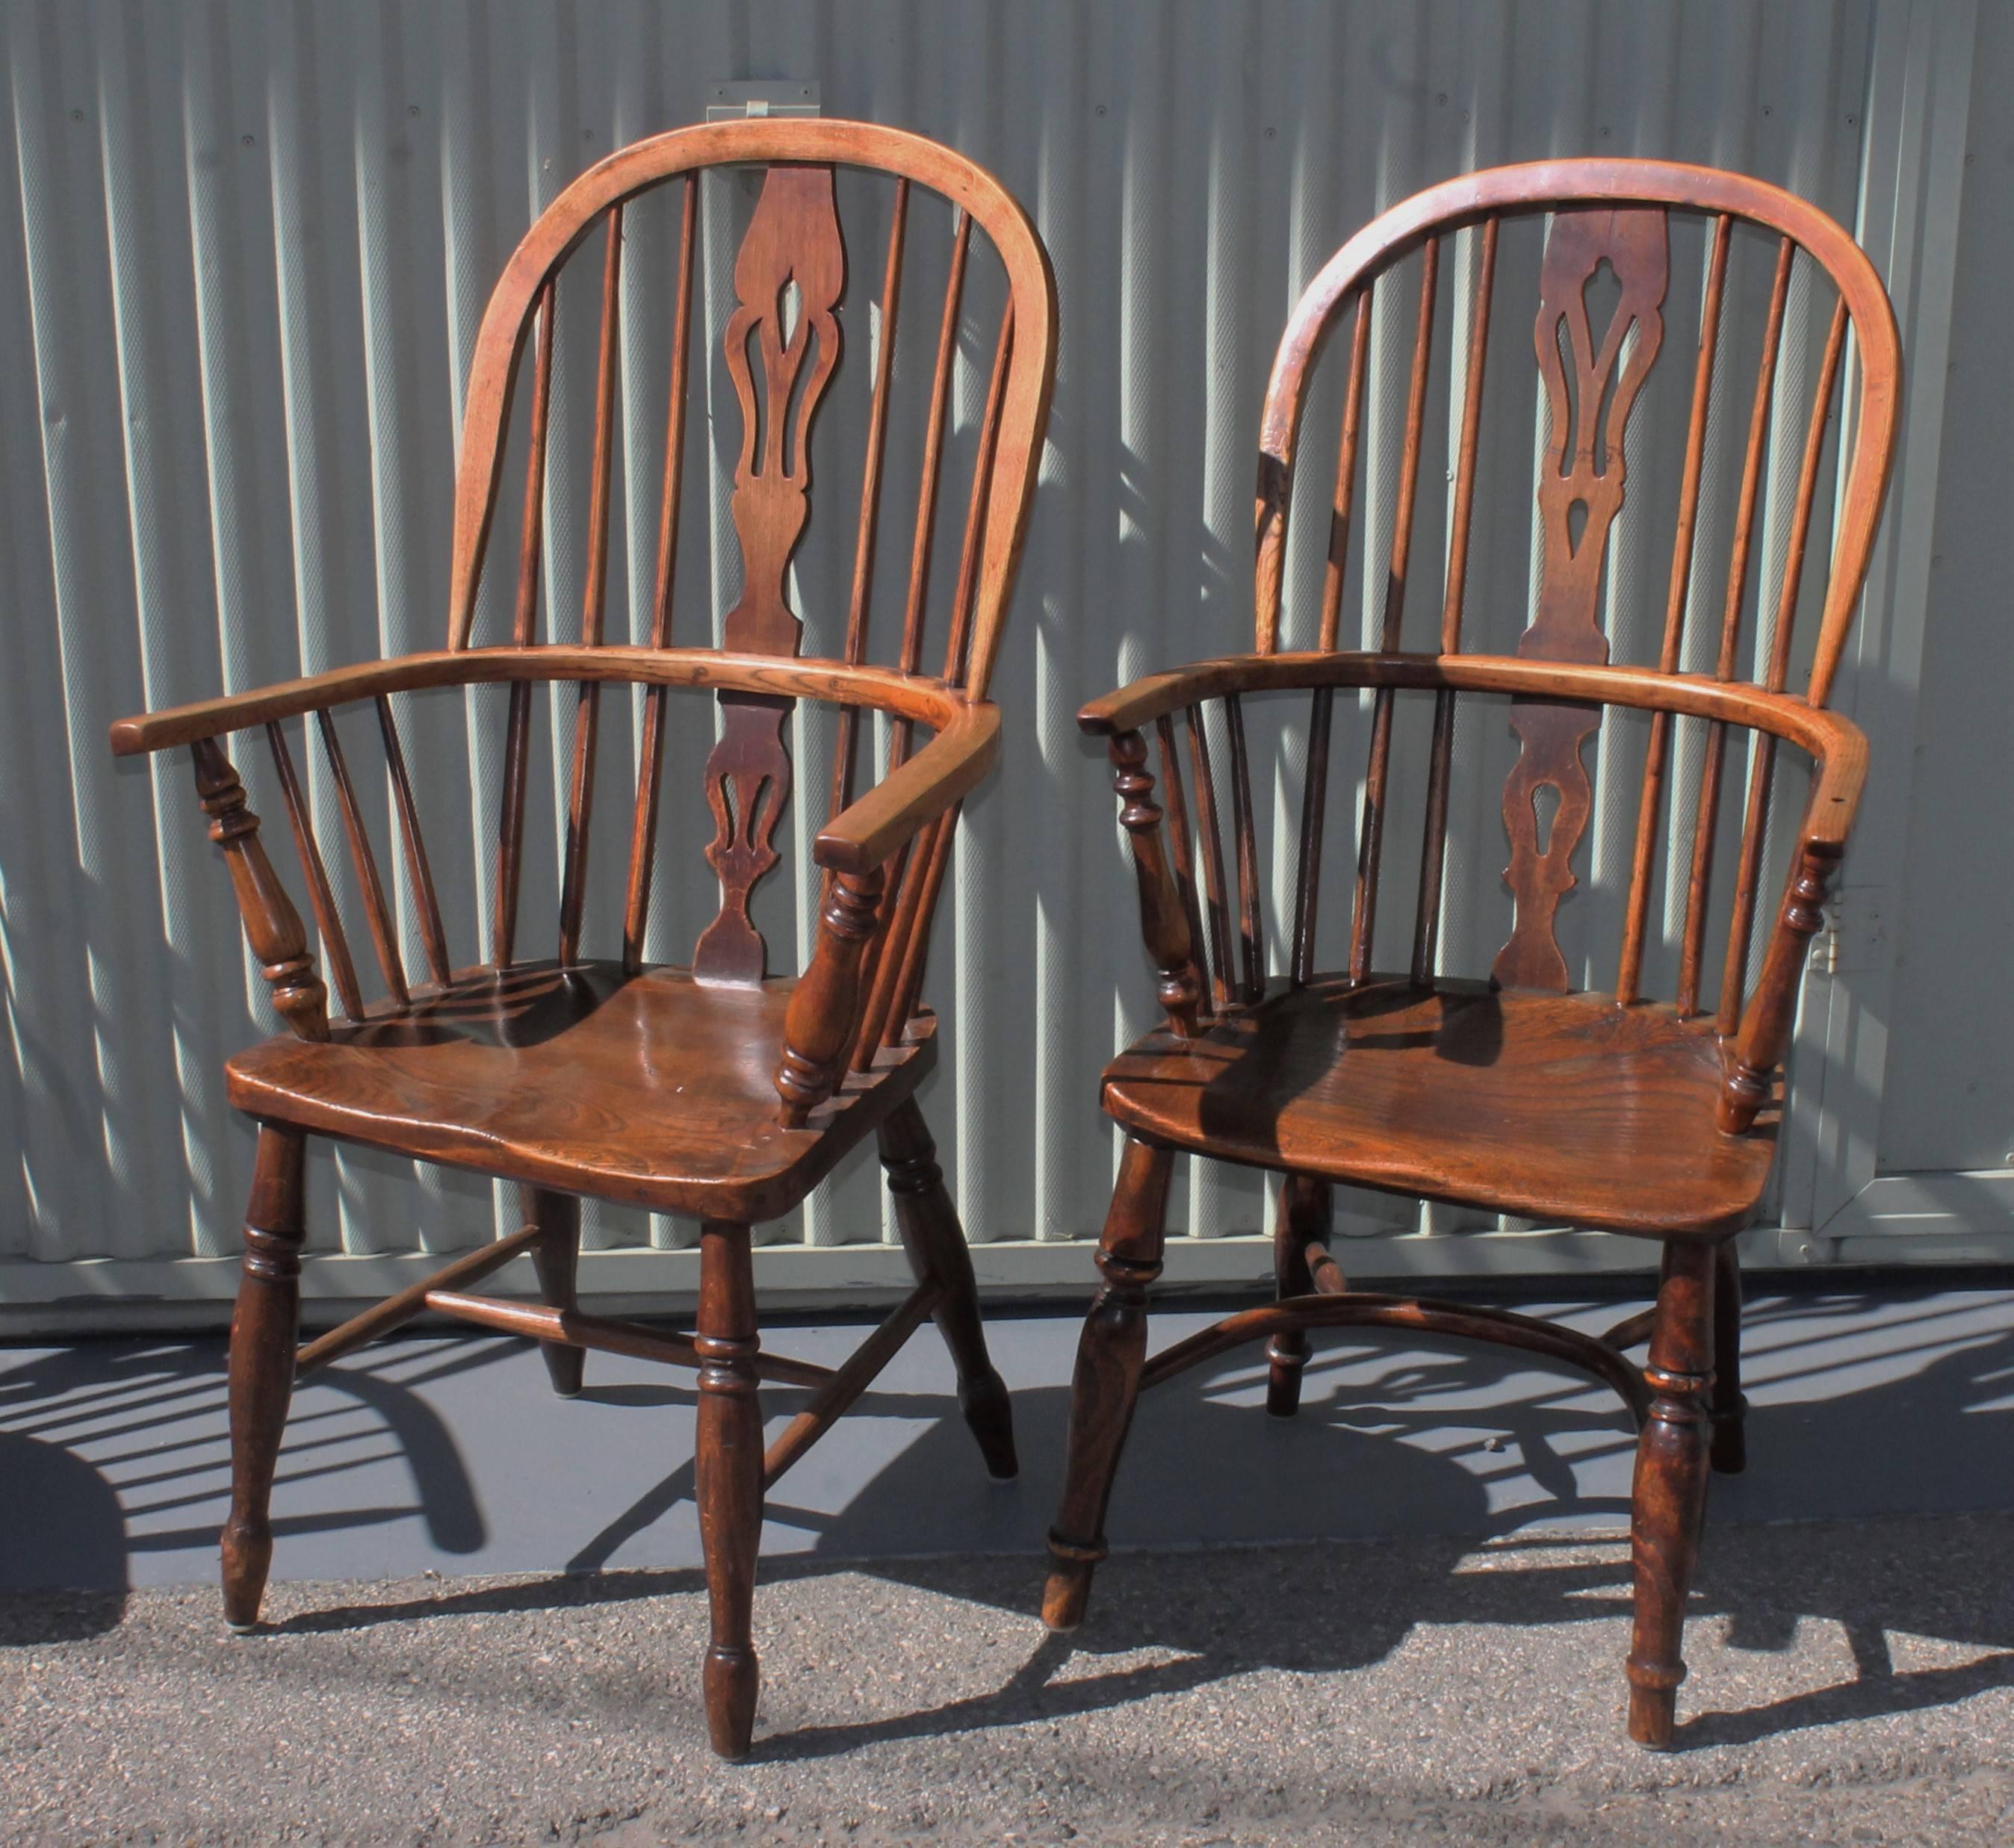 Patinated Set of Six Early 19th Century English Windsor Chairs